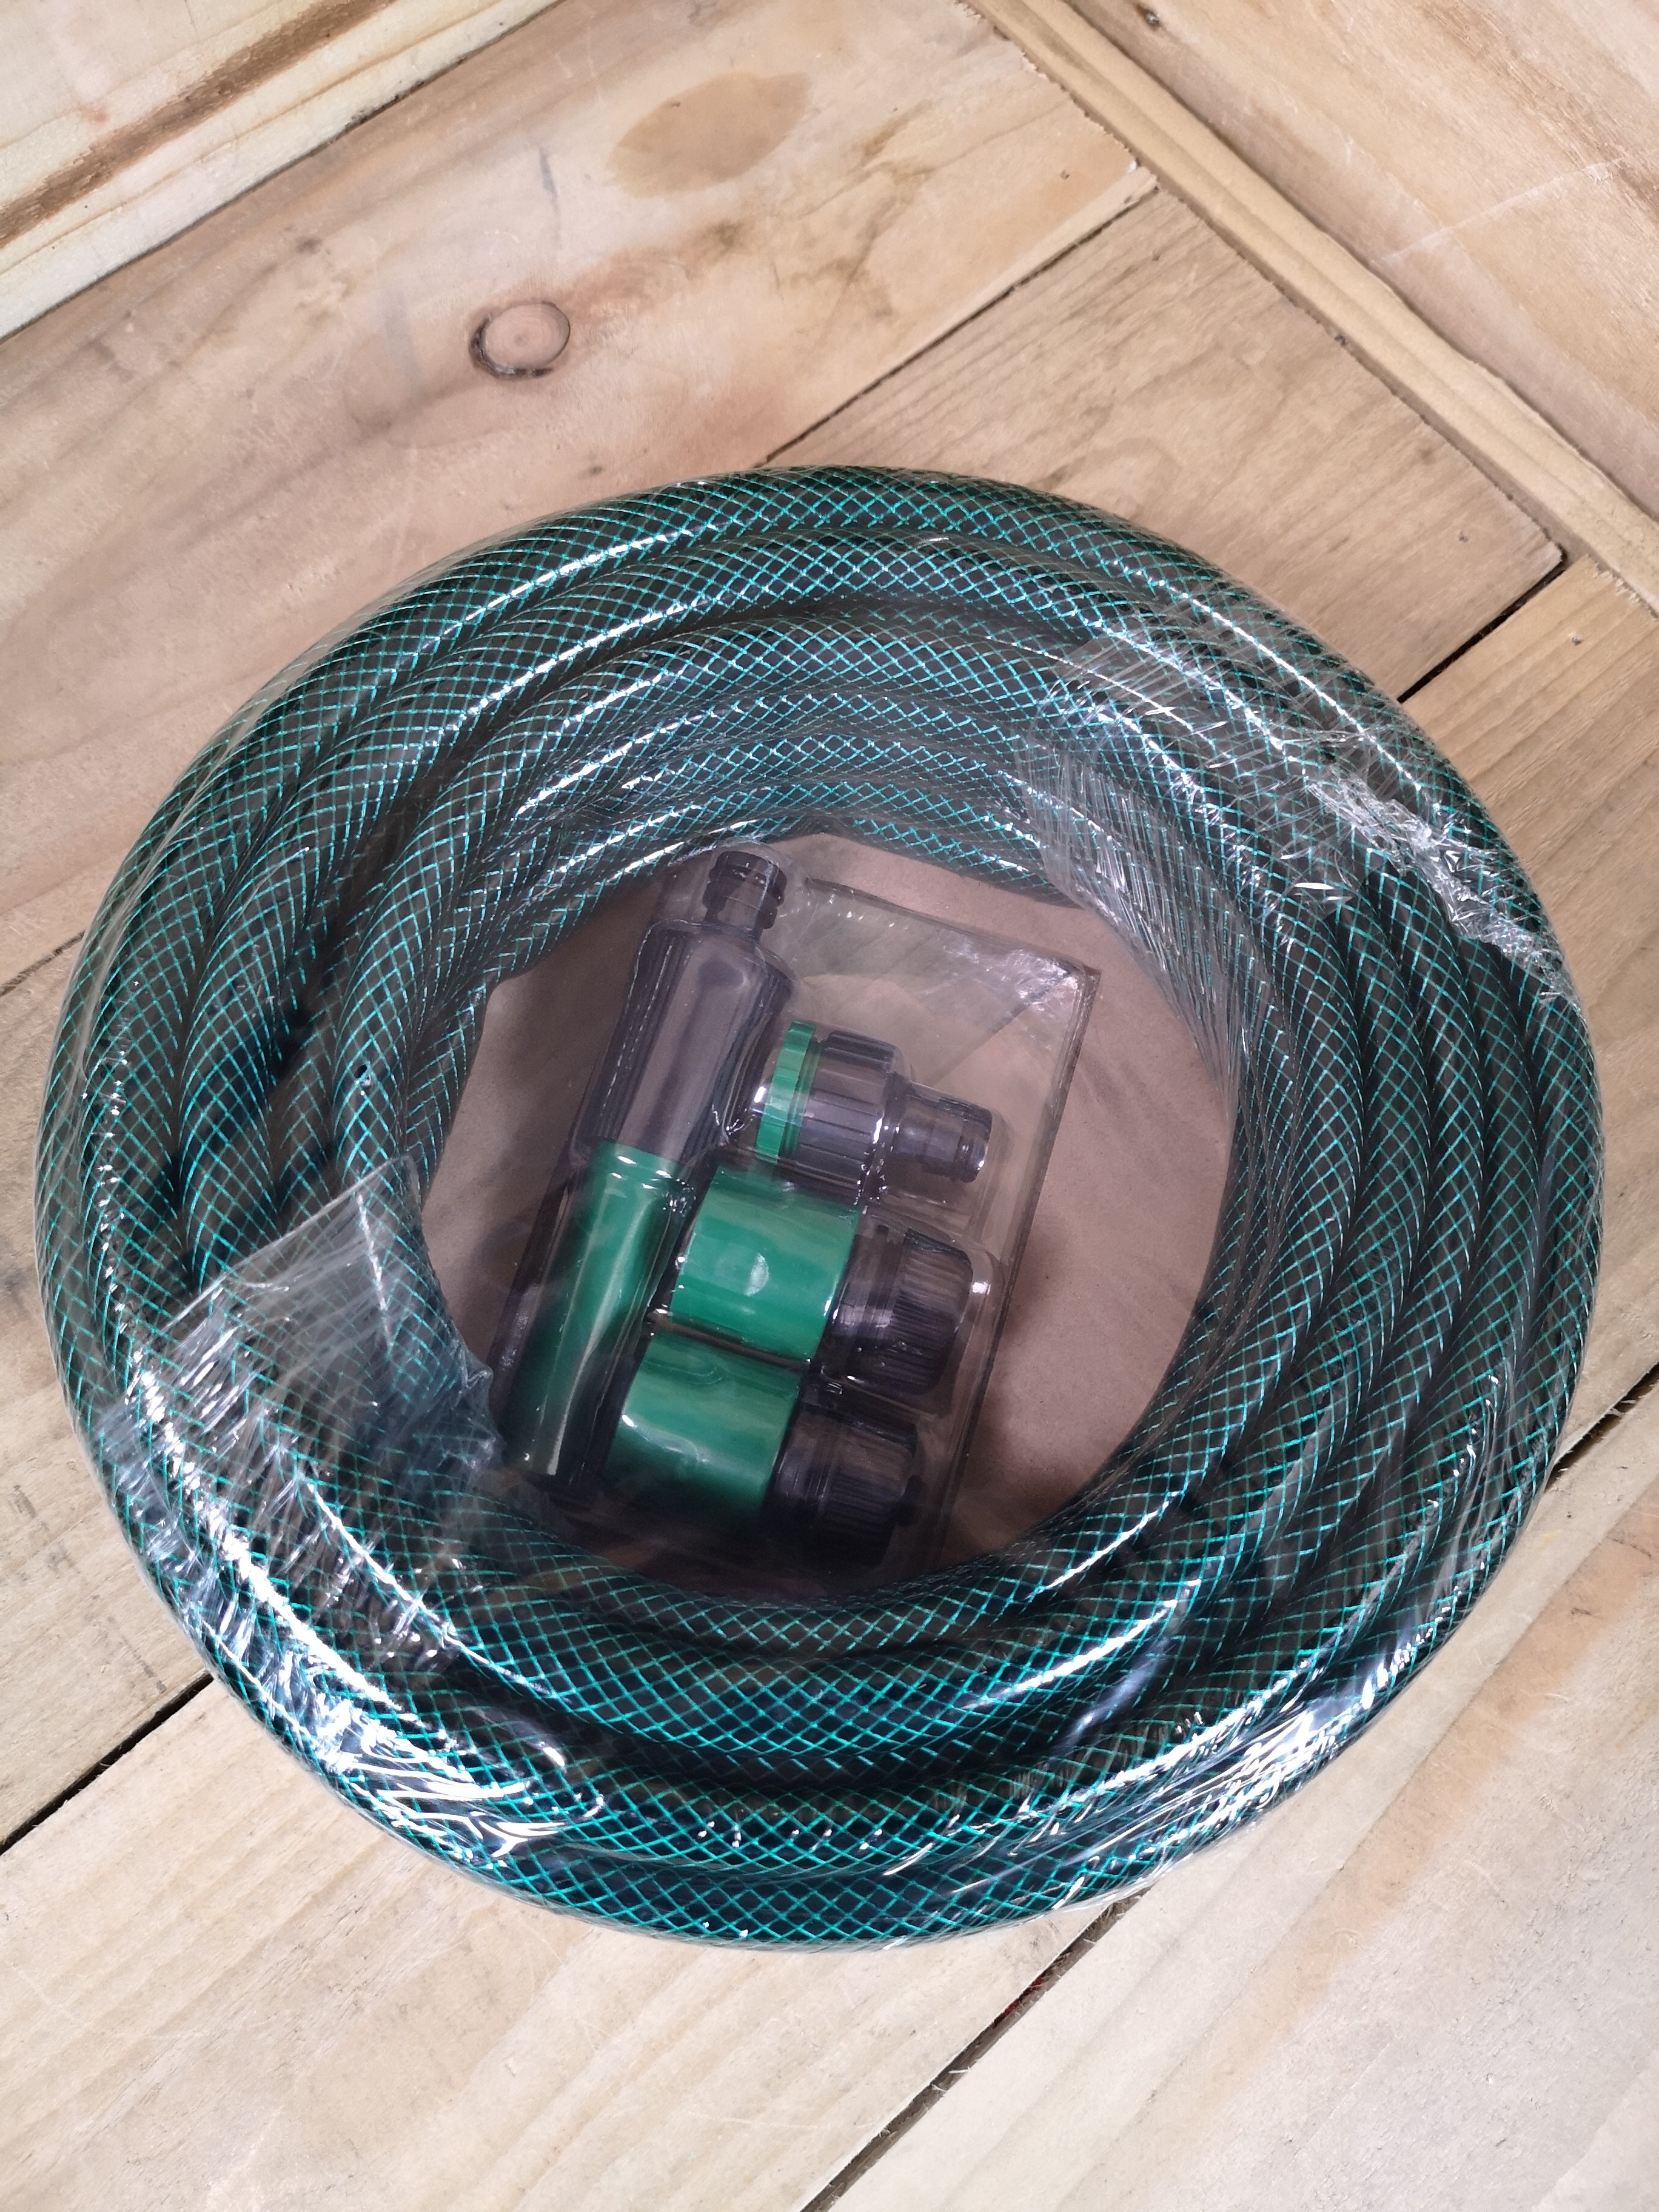 15m Reinforced Garden Hose Pipe / Hosepipe with Spray Nozzle Set in Green